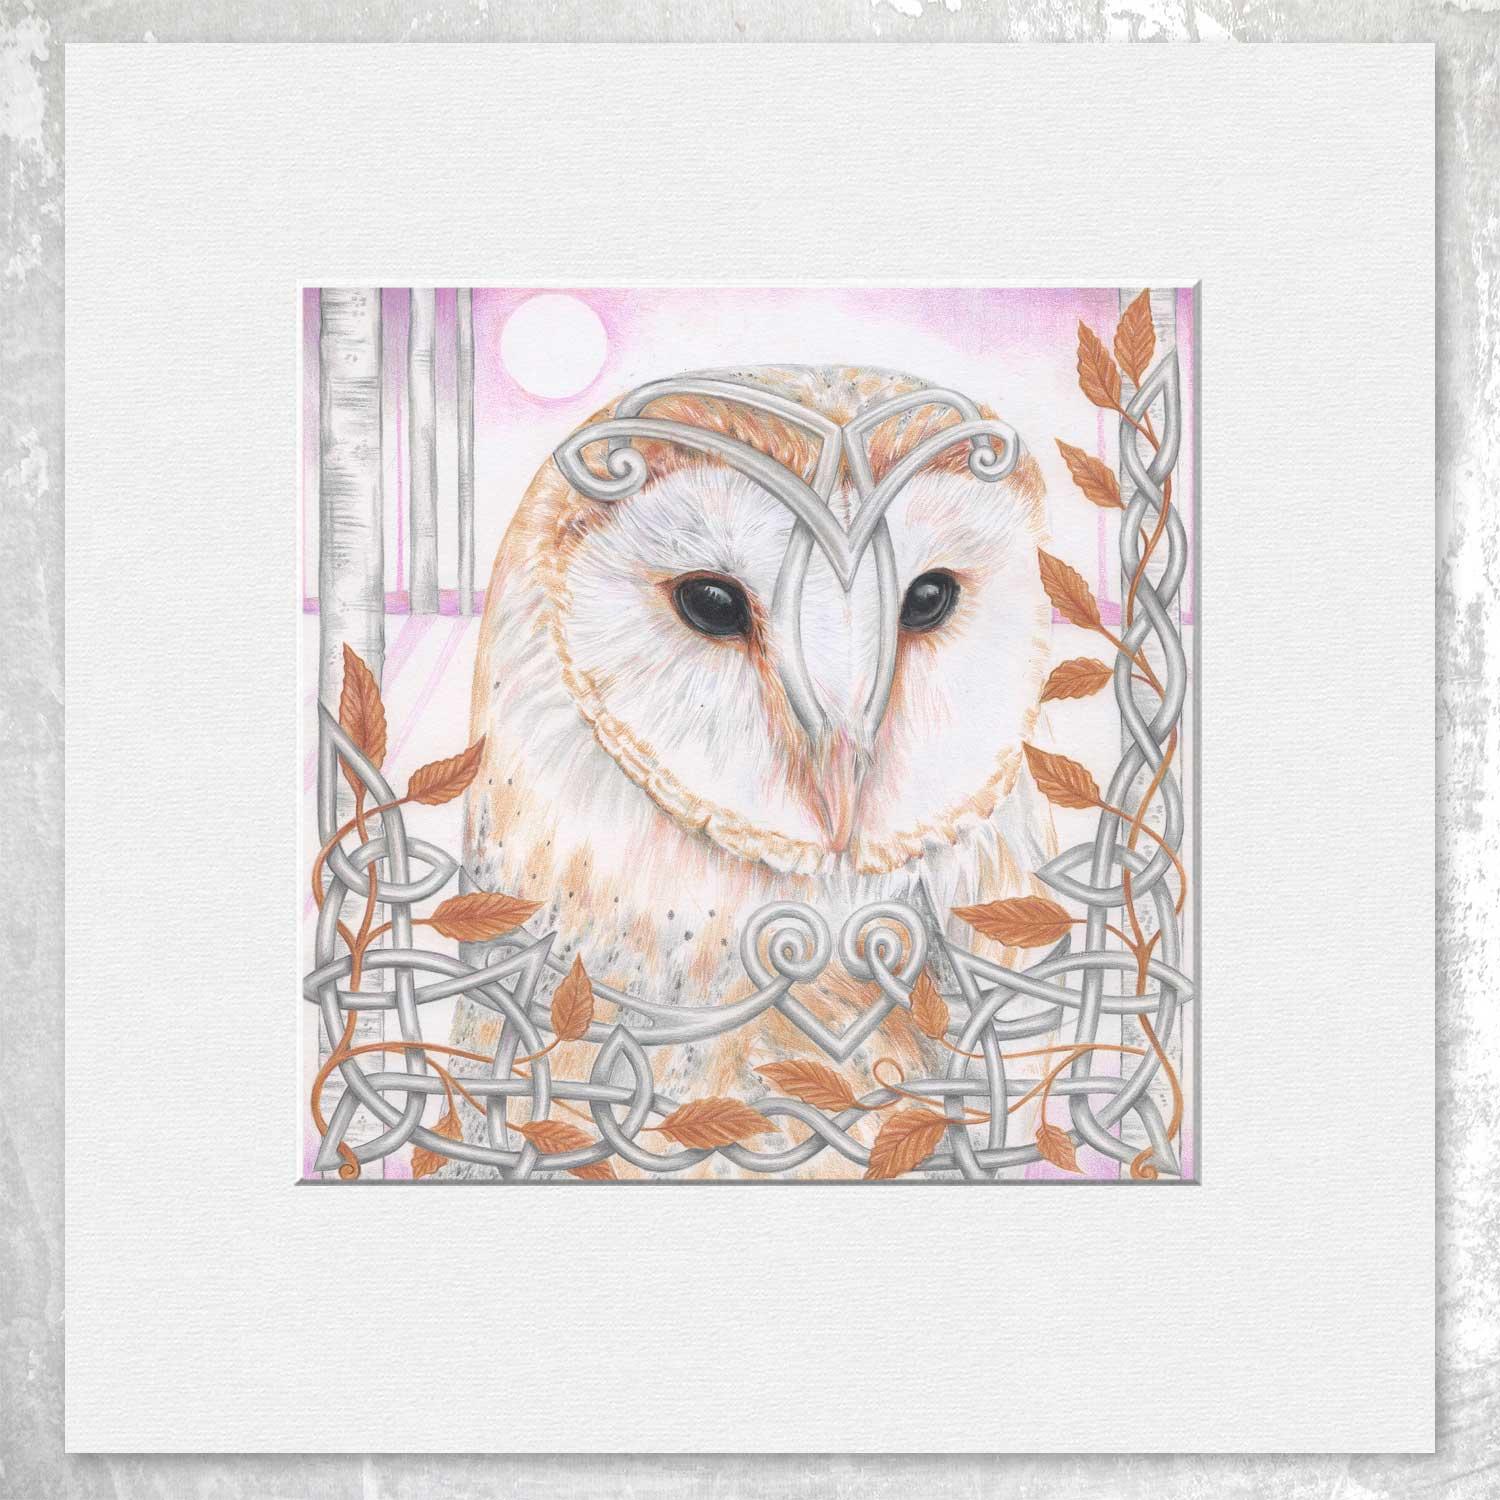 Arwen Owl Mounted Card from an original painting by artist Marjory Tait